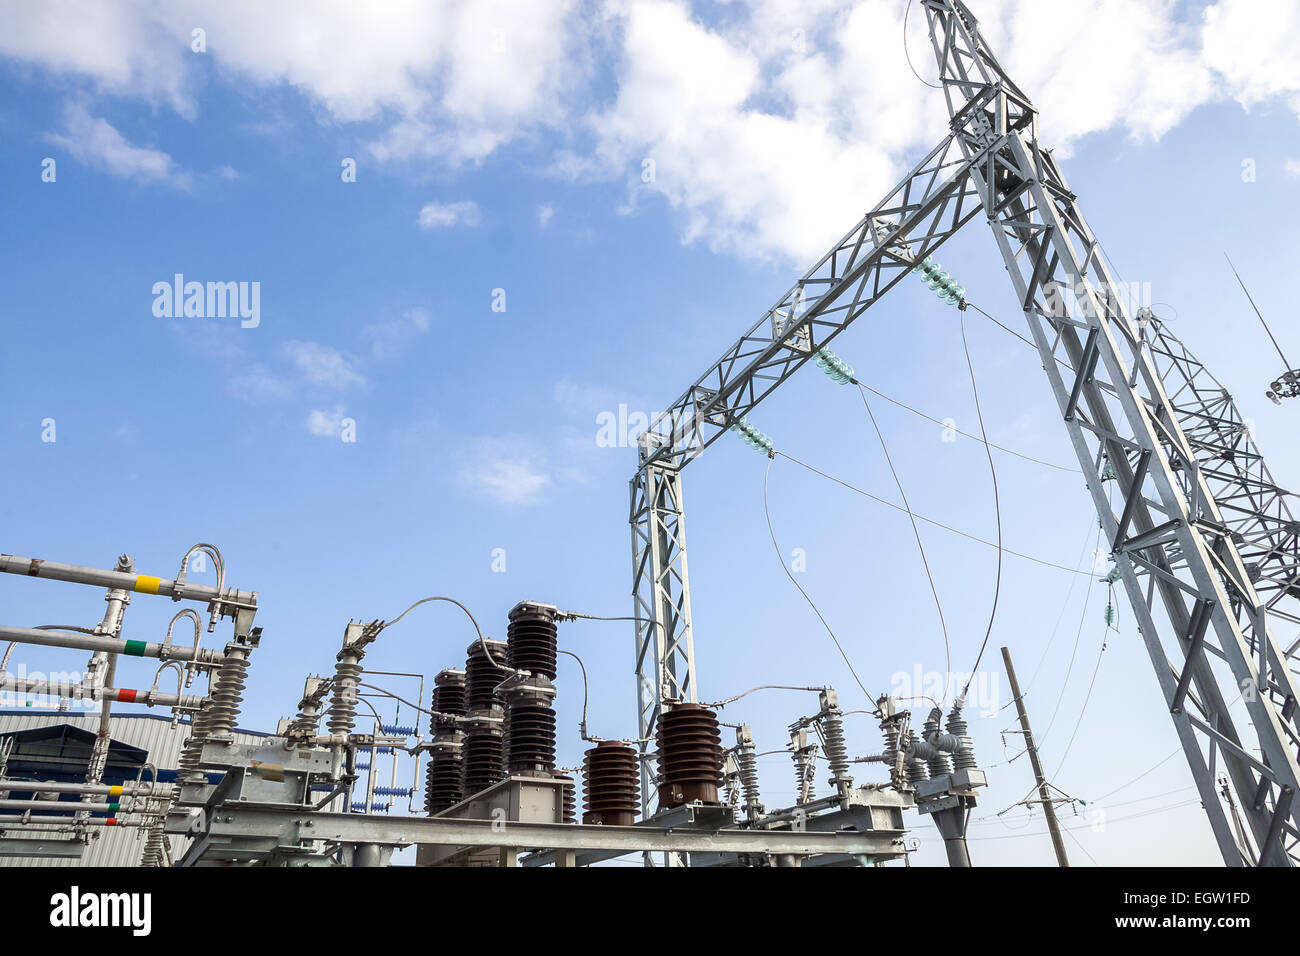 a high voltage power pylons against blue sky Stock Photo